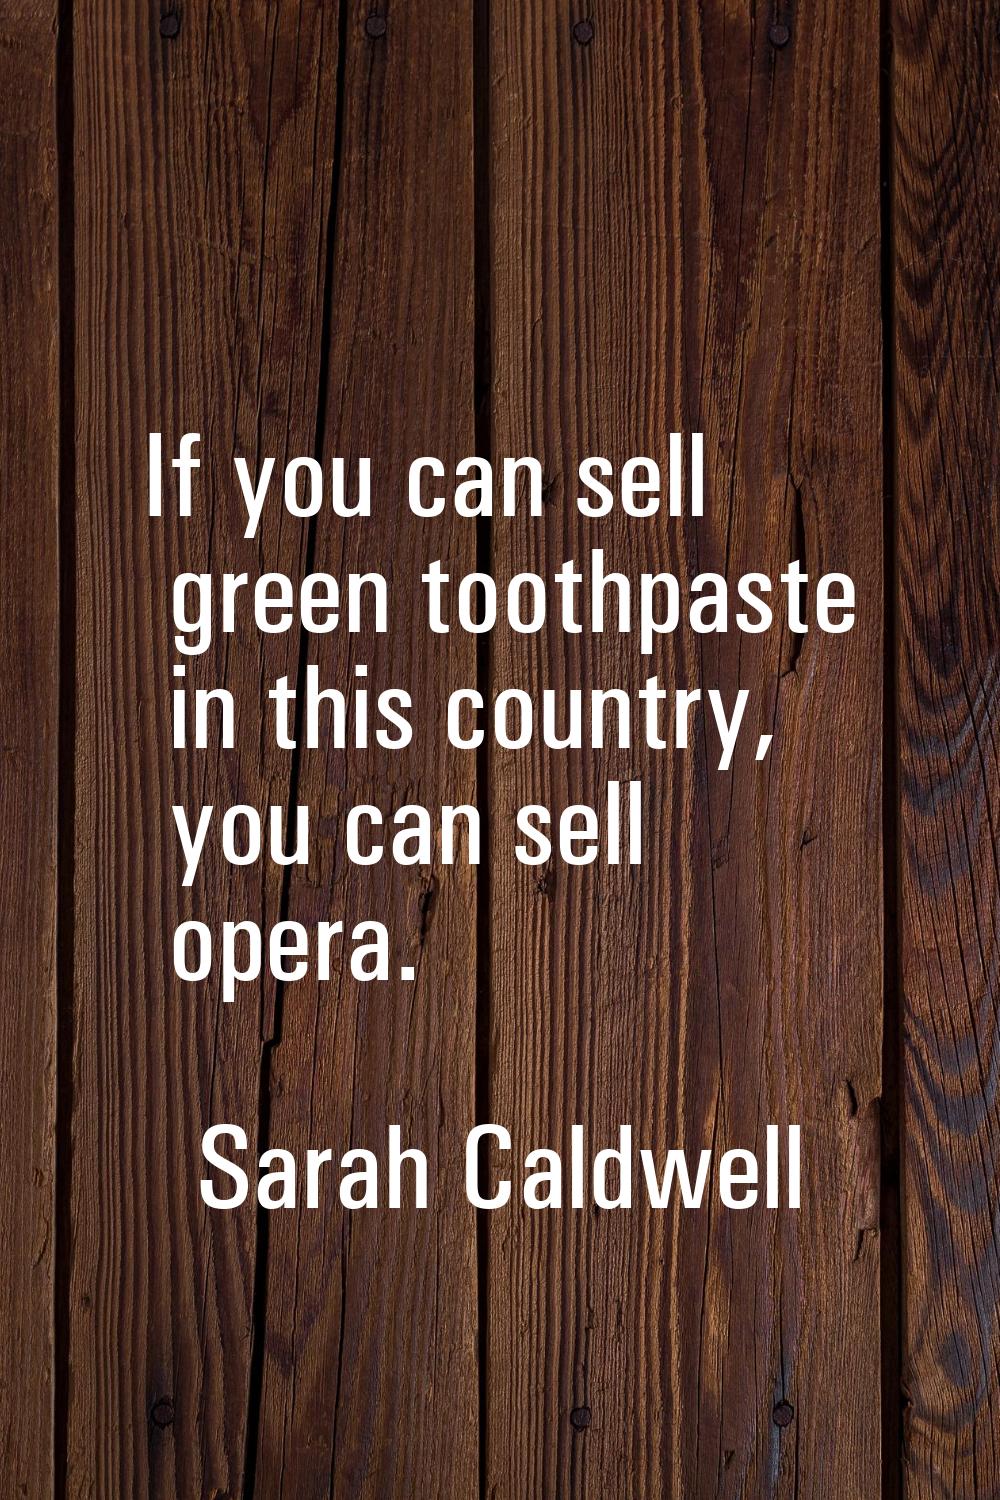 If you can sell green toothpaste in this country, you can sell opera.